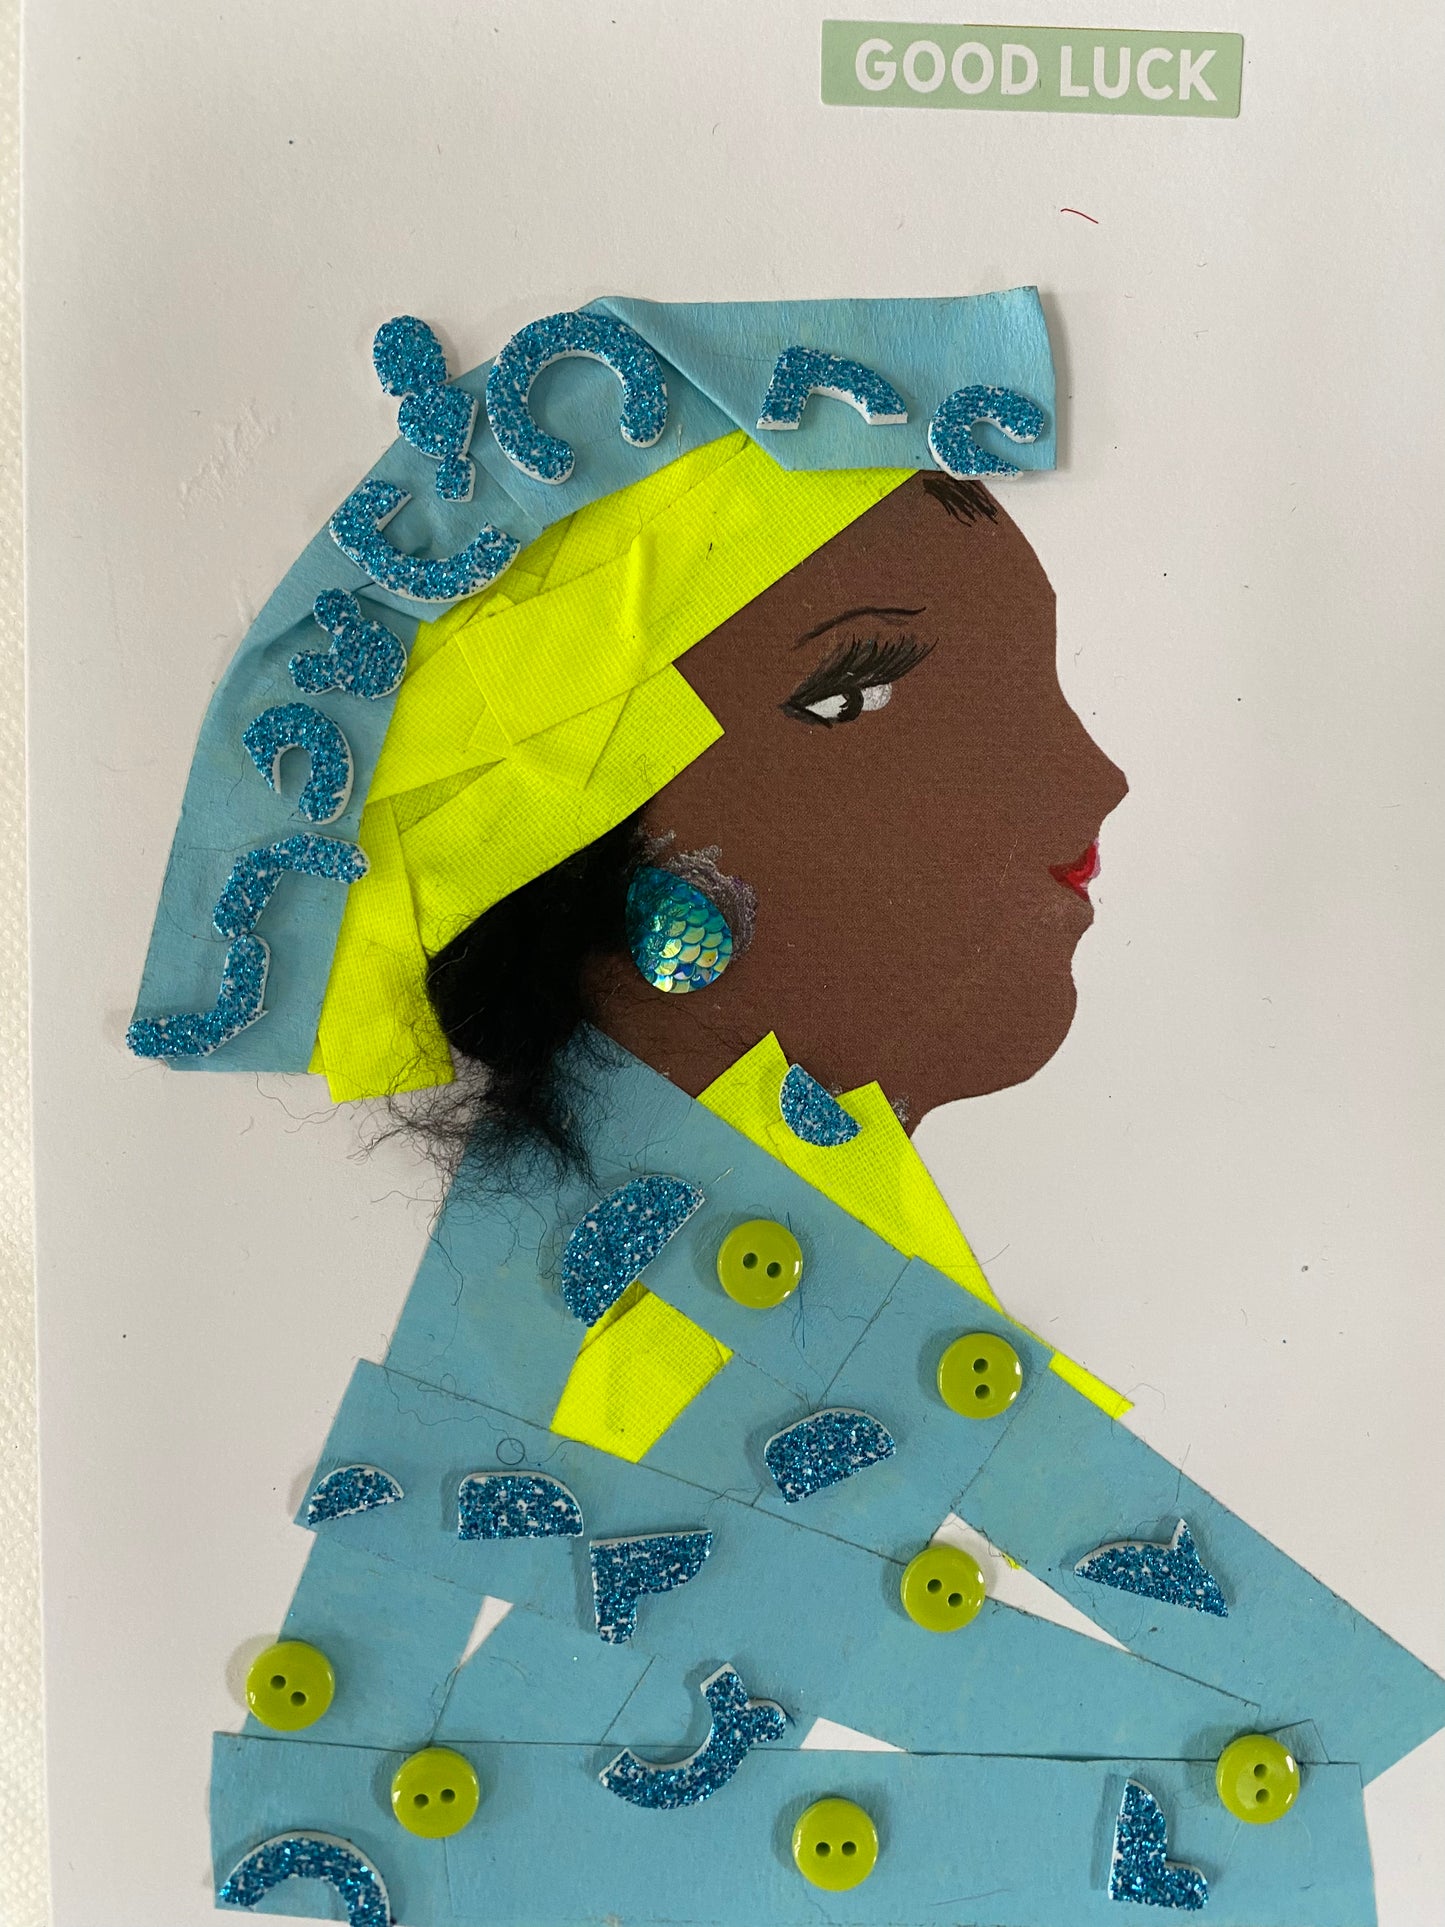 I designed this card of a woman named Blakeley Blue. She has a brown skin tone and is wearing a blue and neon yellow sparkly hat. She wearings a matching blue blouse with green button and blue sparkles. She wears blue earrings and in the corner it says good luck.